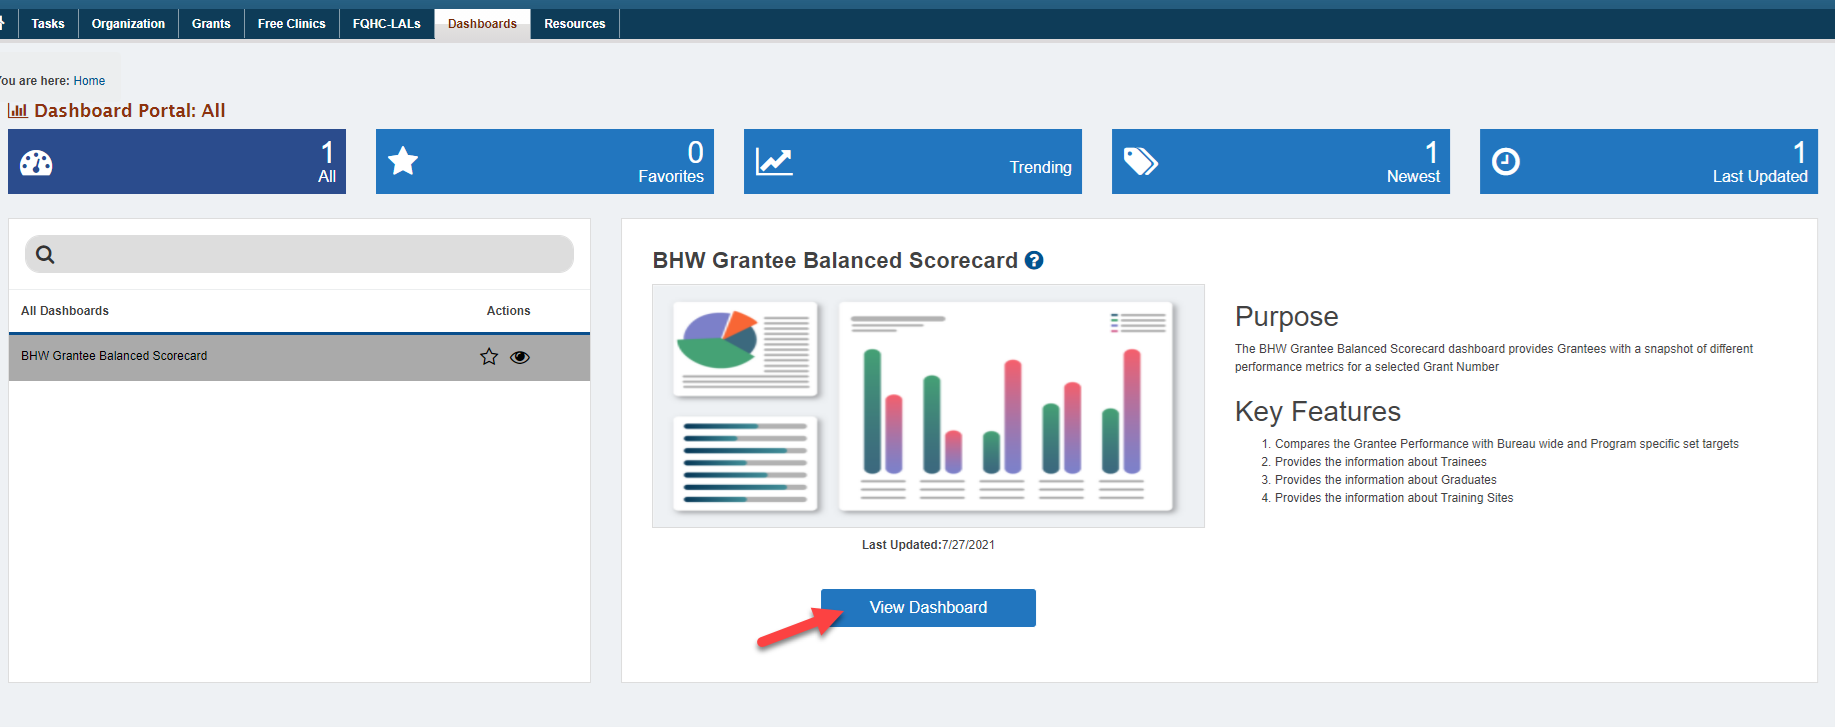 Screenshot of the EHBs Dashboards page showing the View Dashboard button